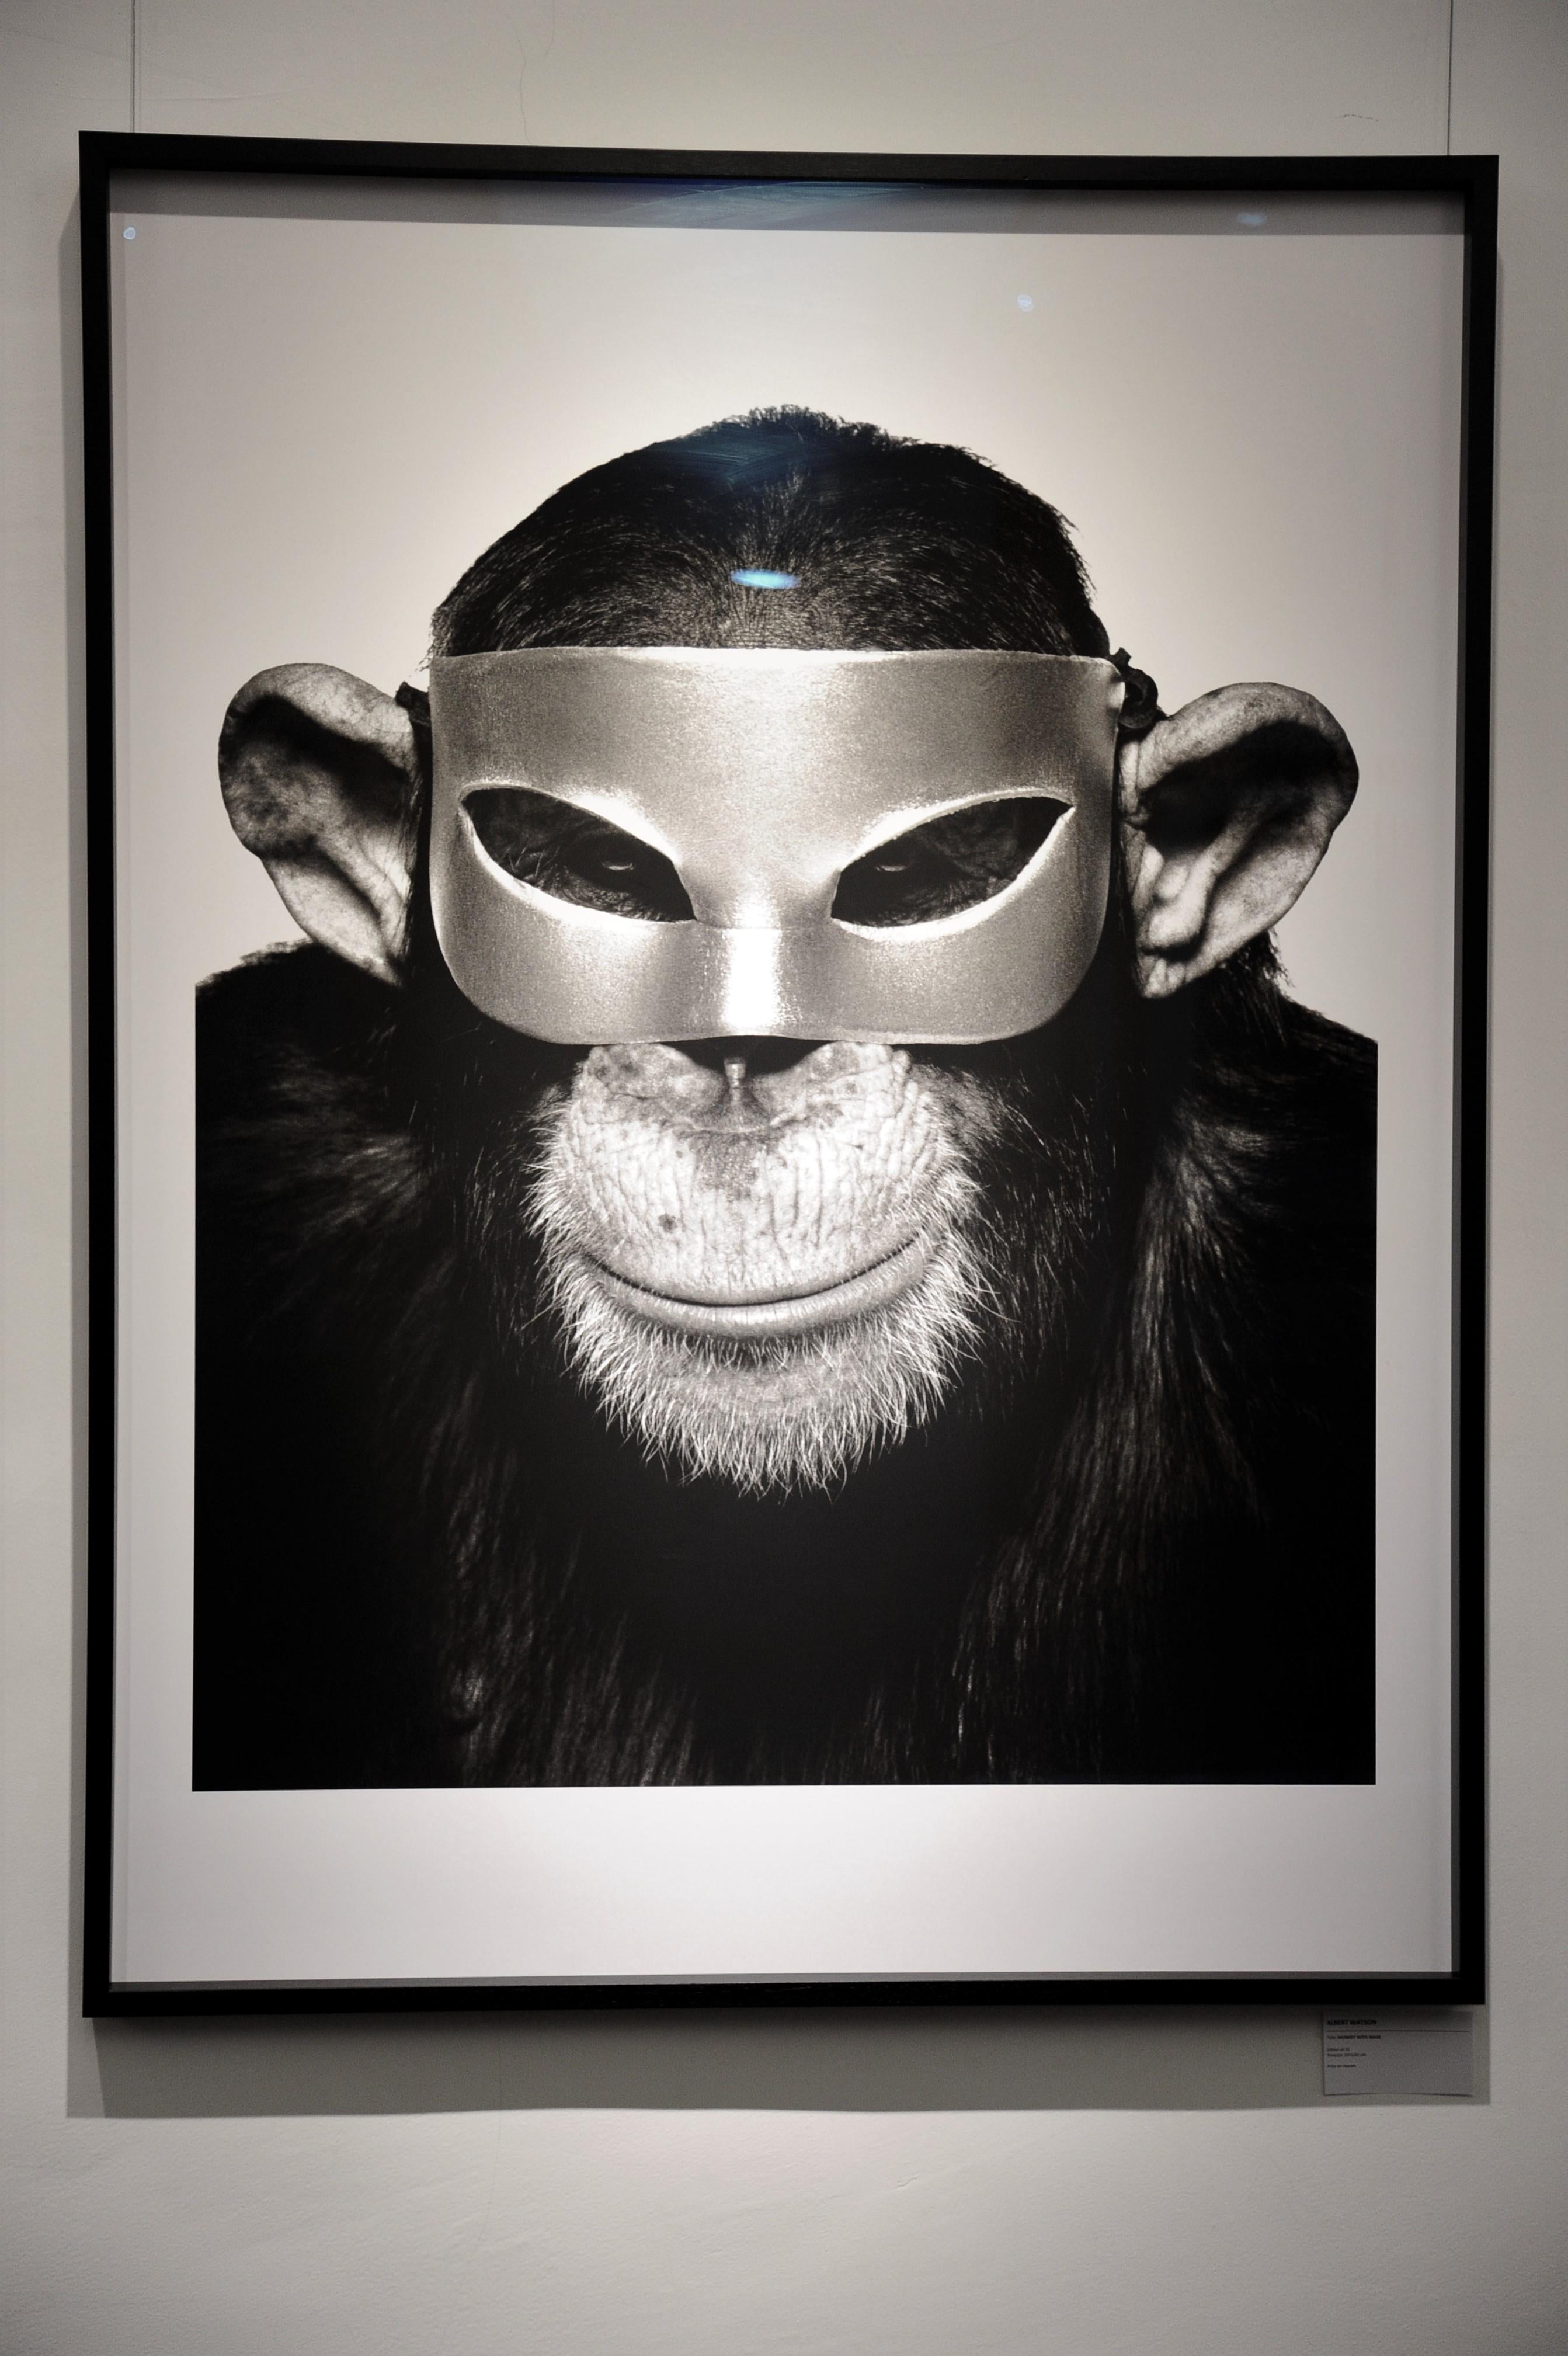 Monkey with Mask - animal portrait of a chimp with mask.  - Photograph by Albert Watson